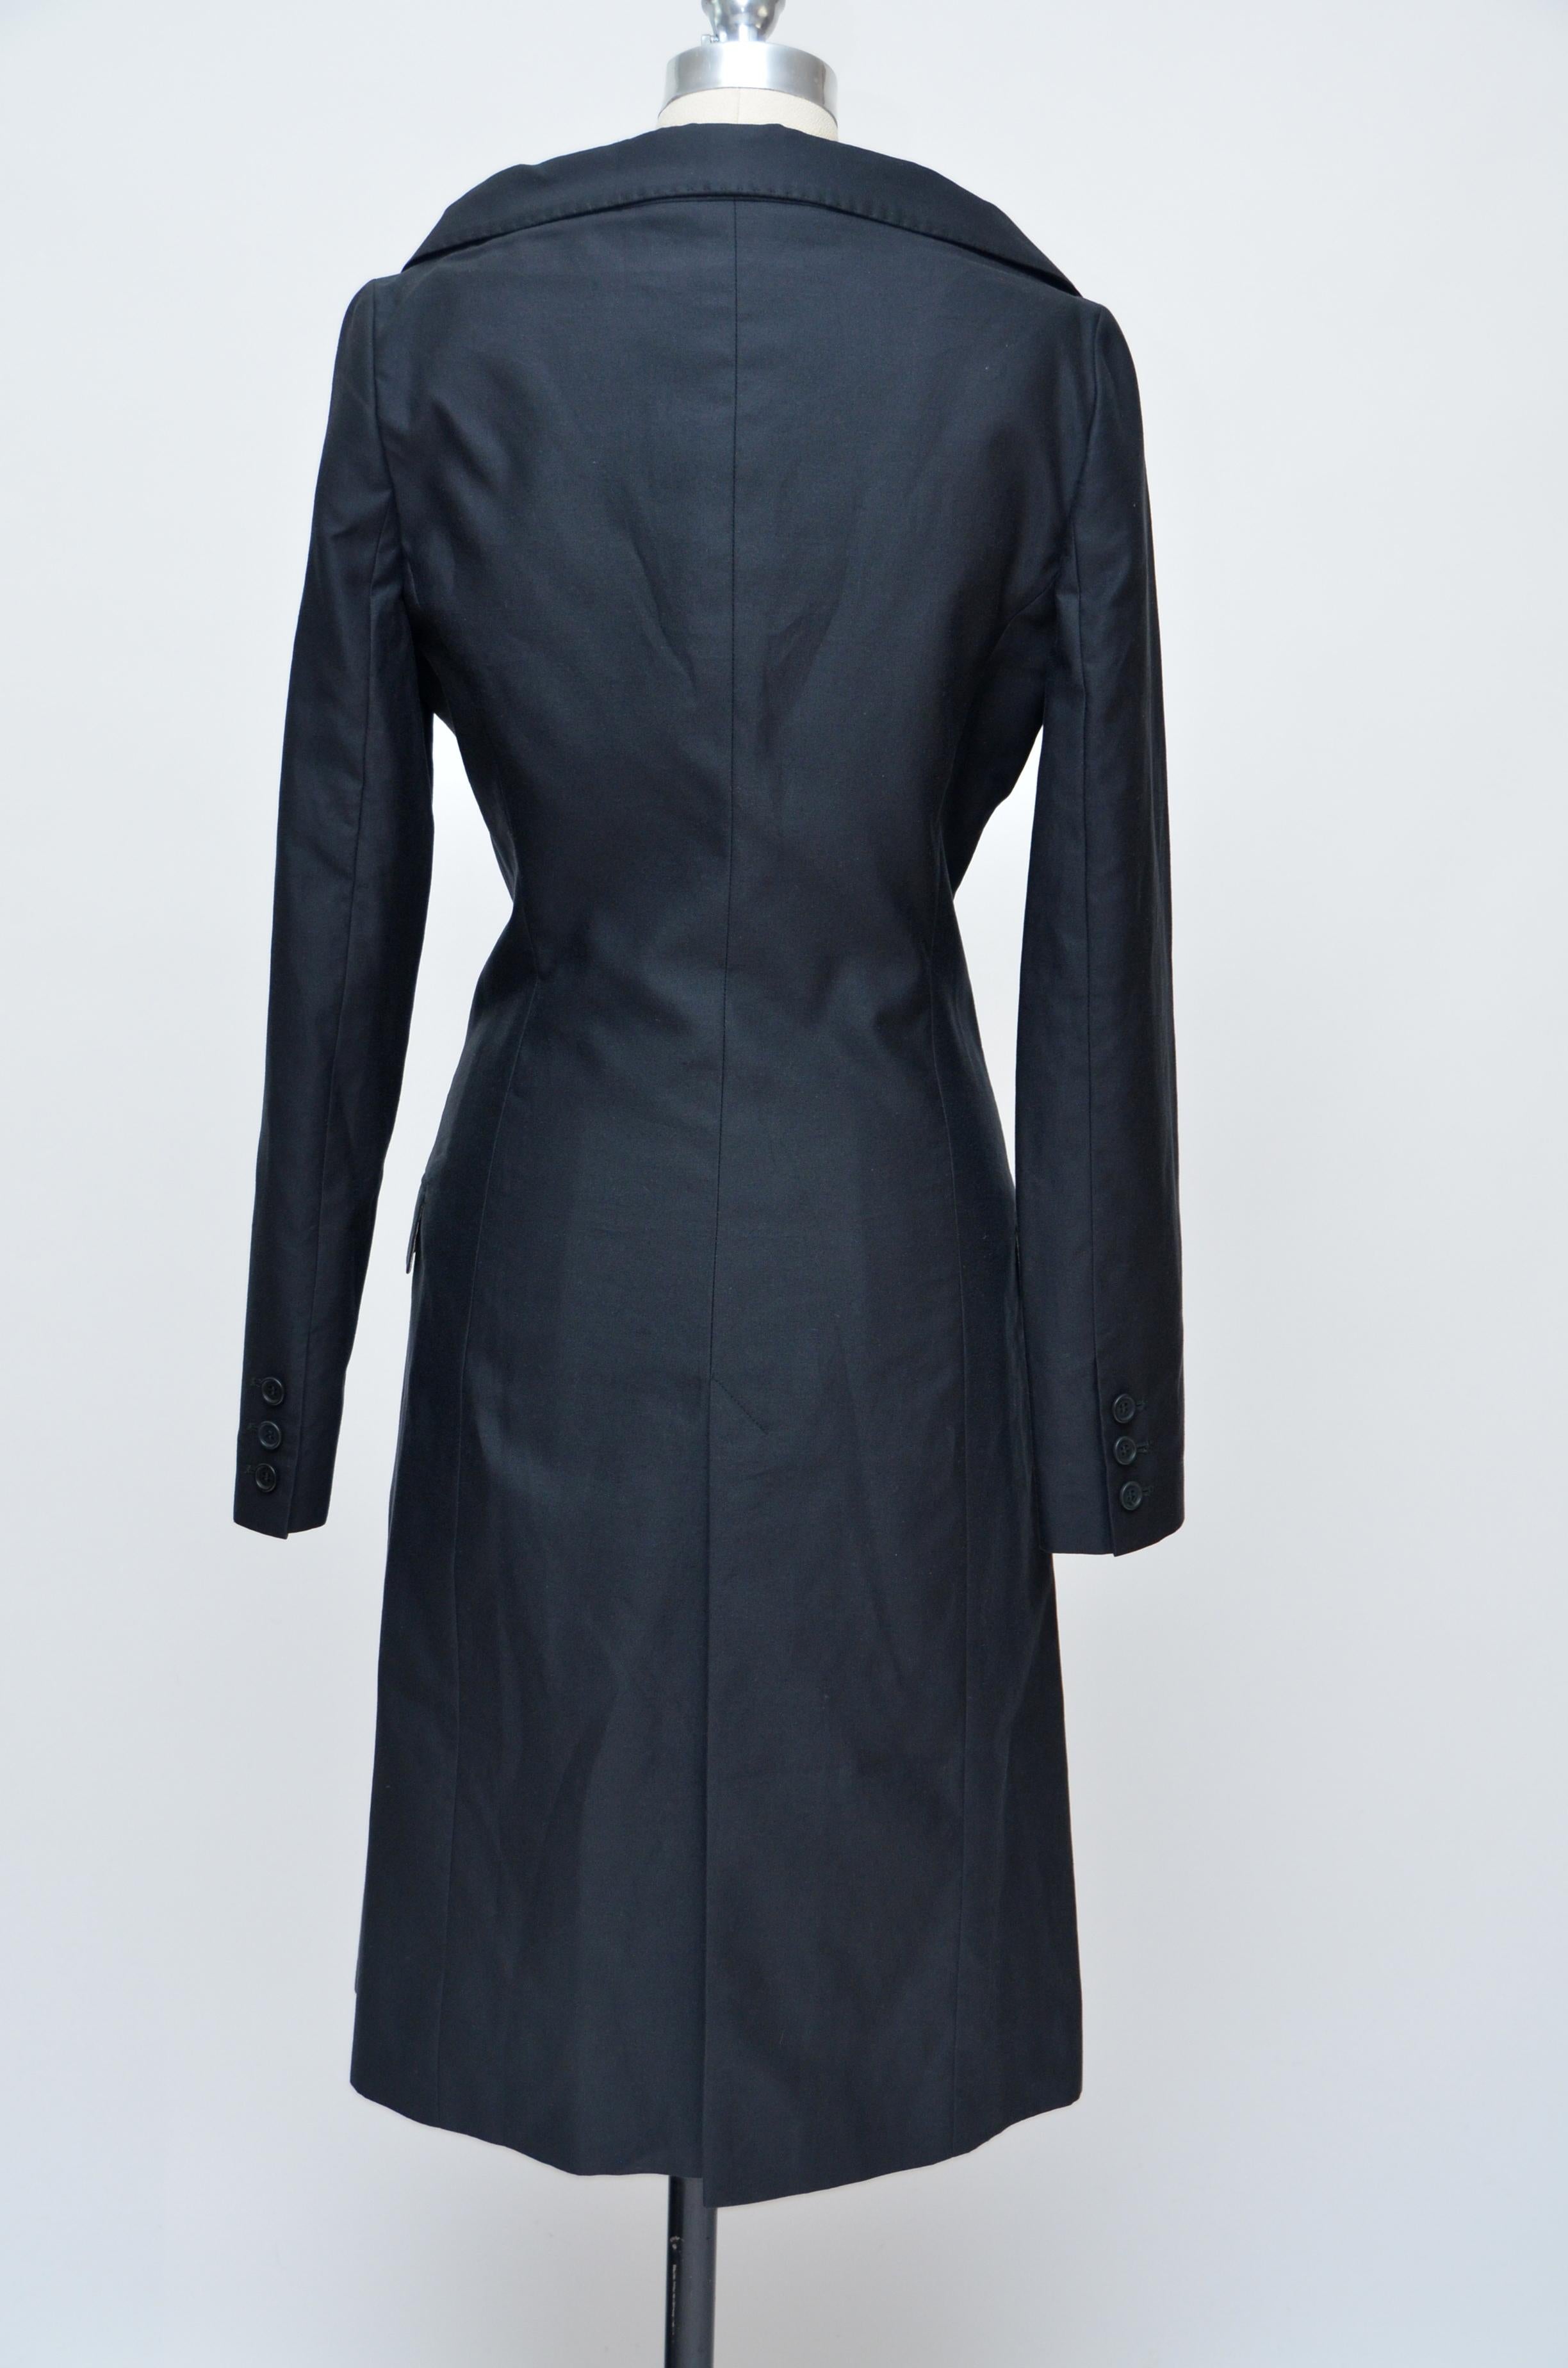 Alexander McQueen sexy coat with drop down shoulders.
Each shoulder have straps secured by buttons that can be separated and taken off.
Made in Italy.
Size 40.Photographed on mannequin size 6 US
Fabric is cotton, color black and condition like new